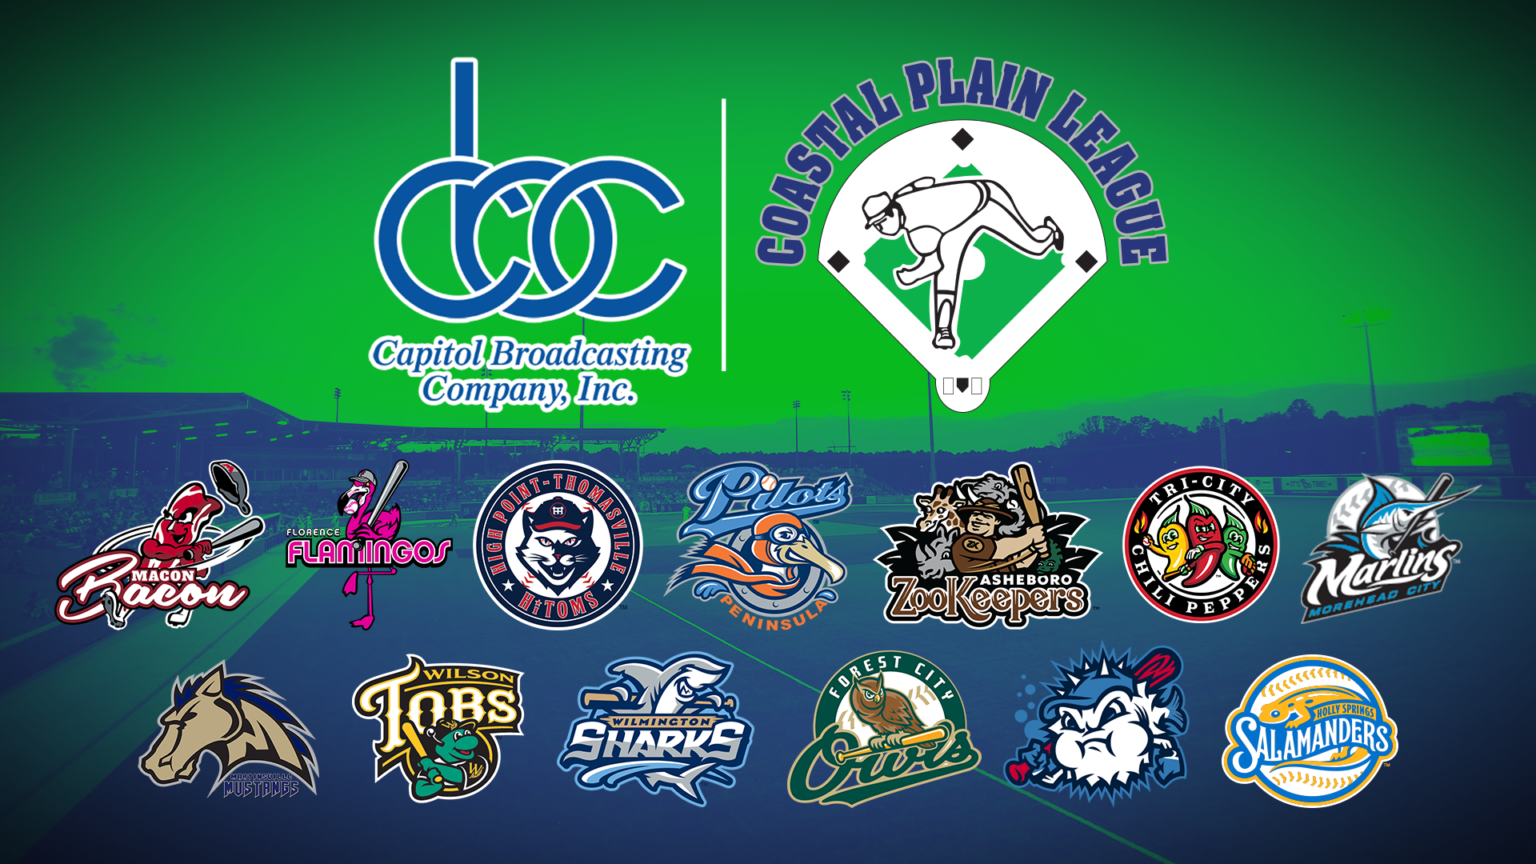 Coastal Plain League Acquired by Capitol Broadcasting Company